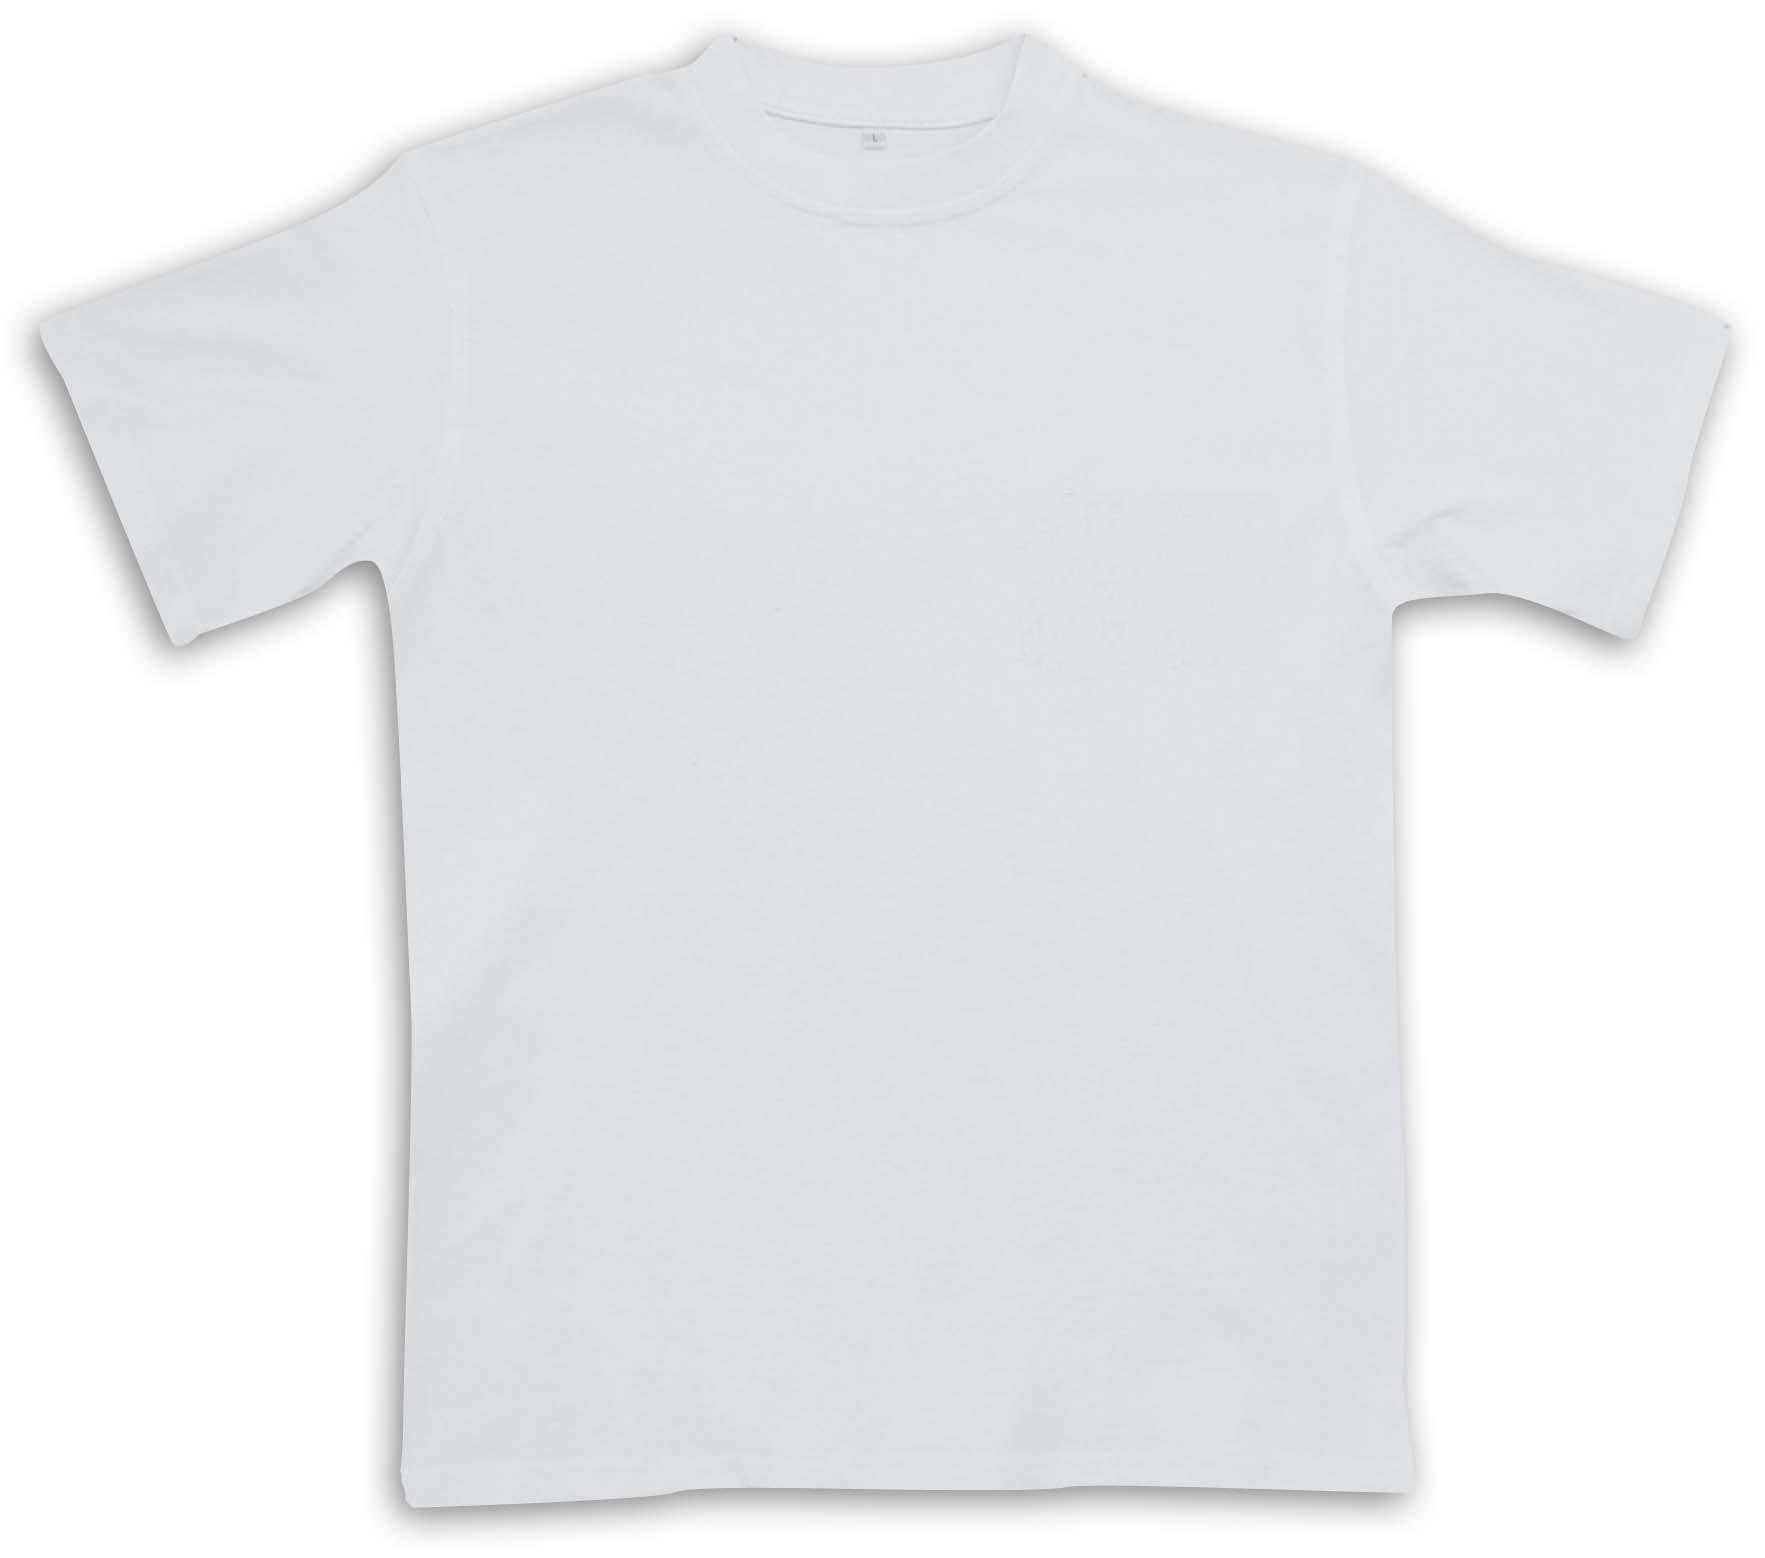 T Shirts Online Archives » How To Make Your Own T Shirt Design